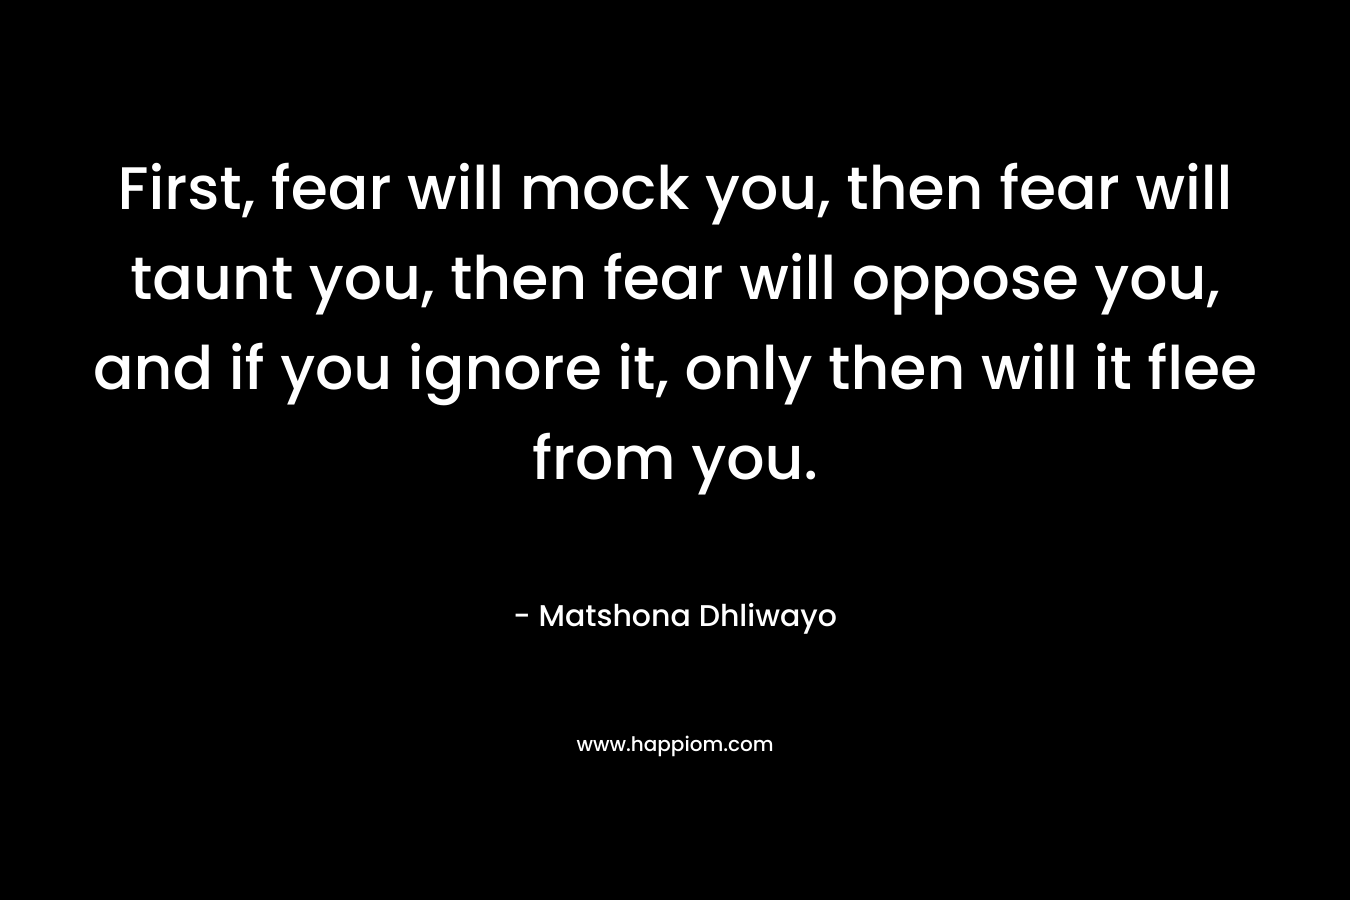 First, fear will mock you, then fear will taunt you, then fear will oppose you, and if you ignore it, only then will it flee from you. – Matshona Dhliwayo